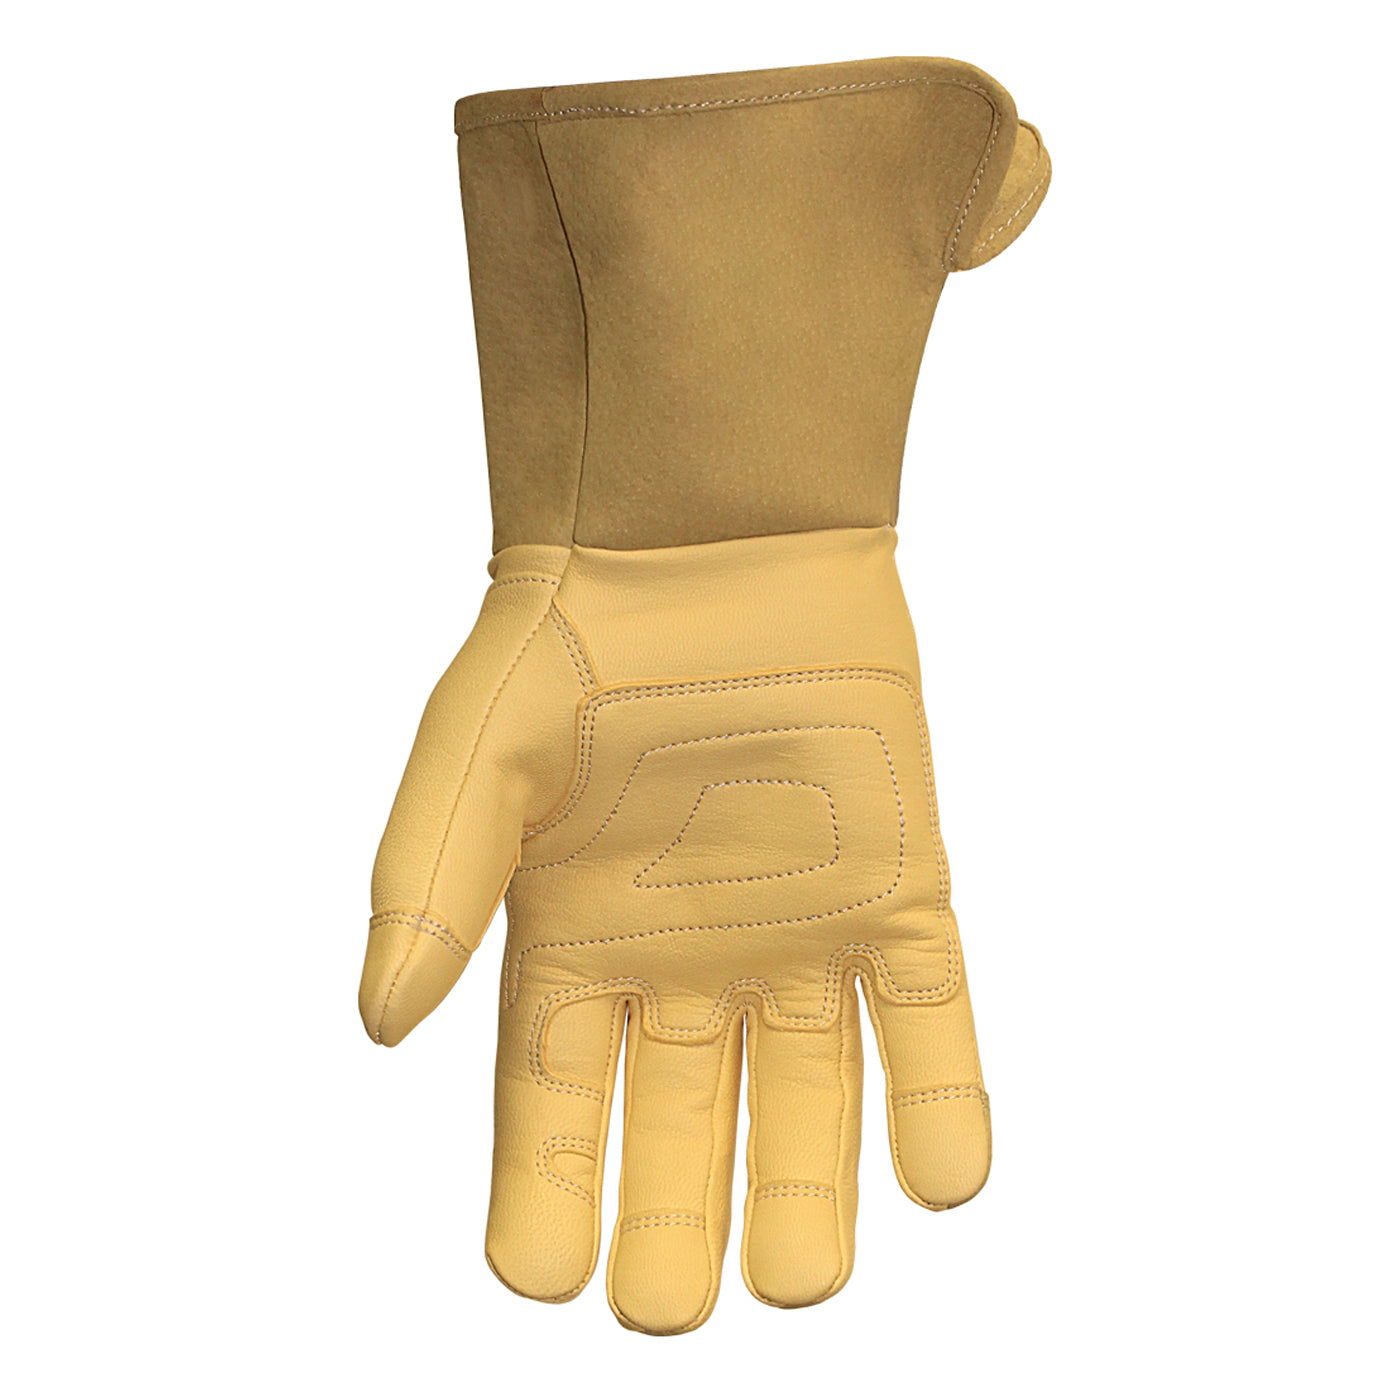 11-3255-60 Youngstown Leather Utility WC Glove - Main image